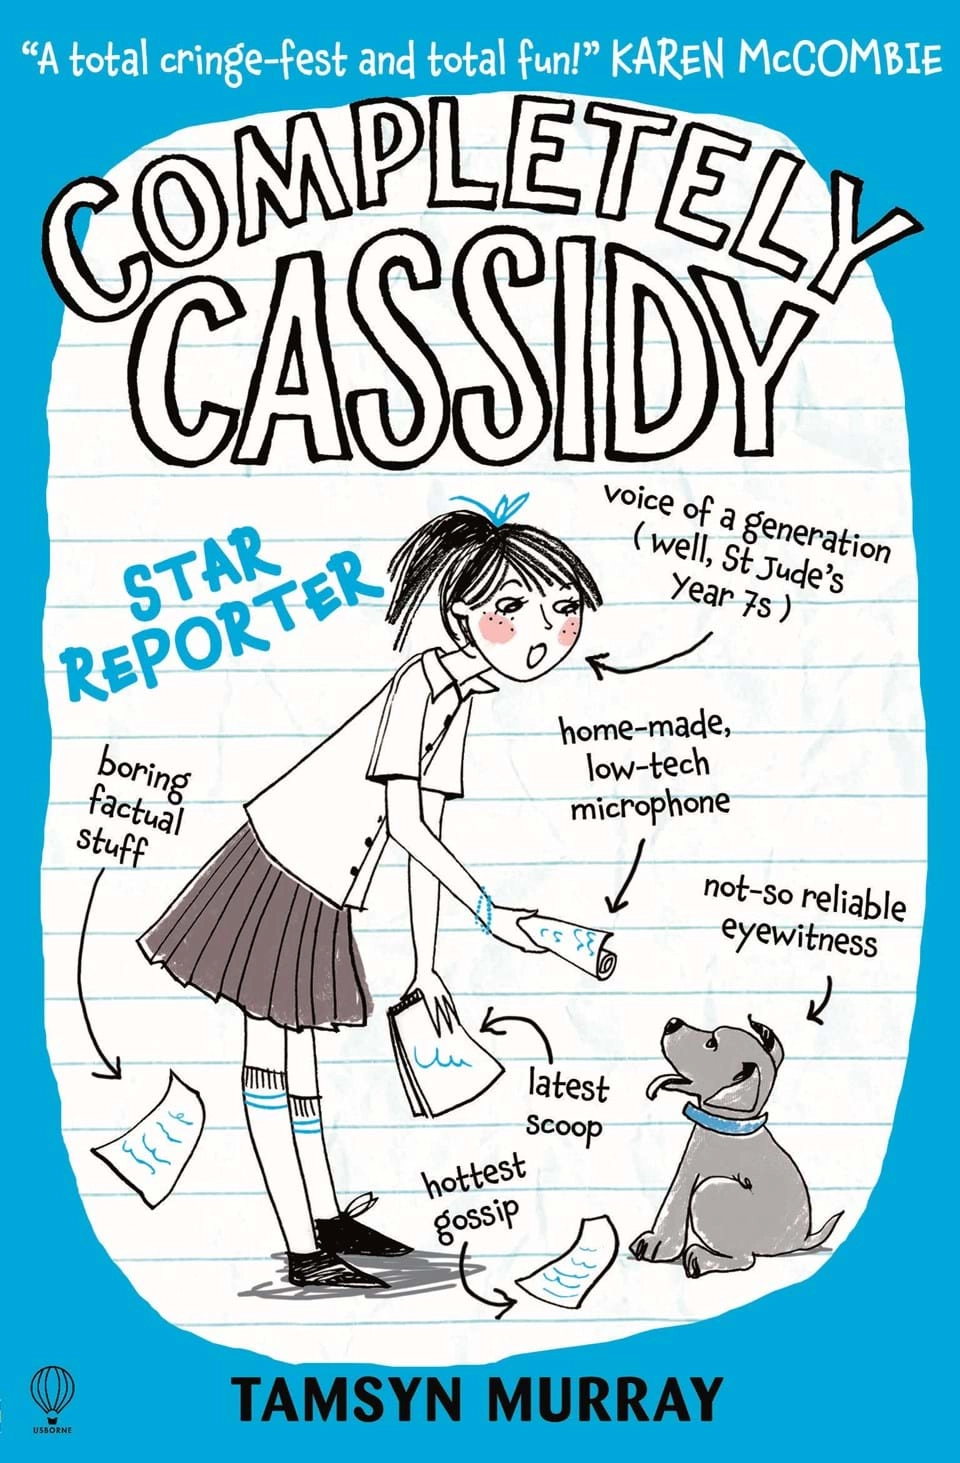 COMPLETELY CASSIDY - STAR REPORTER